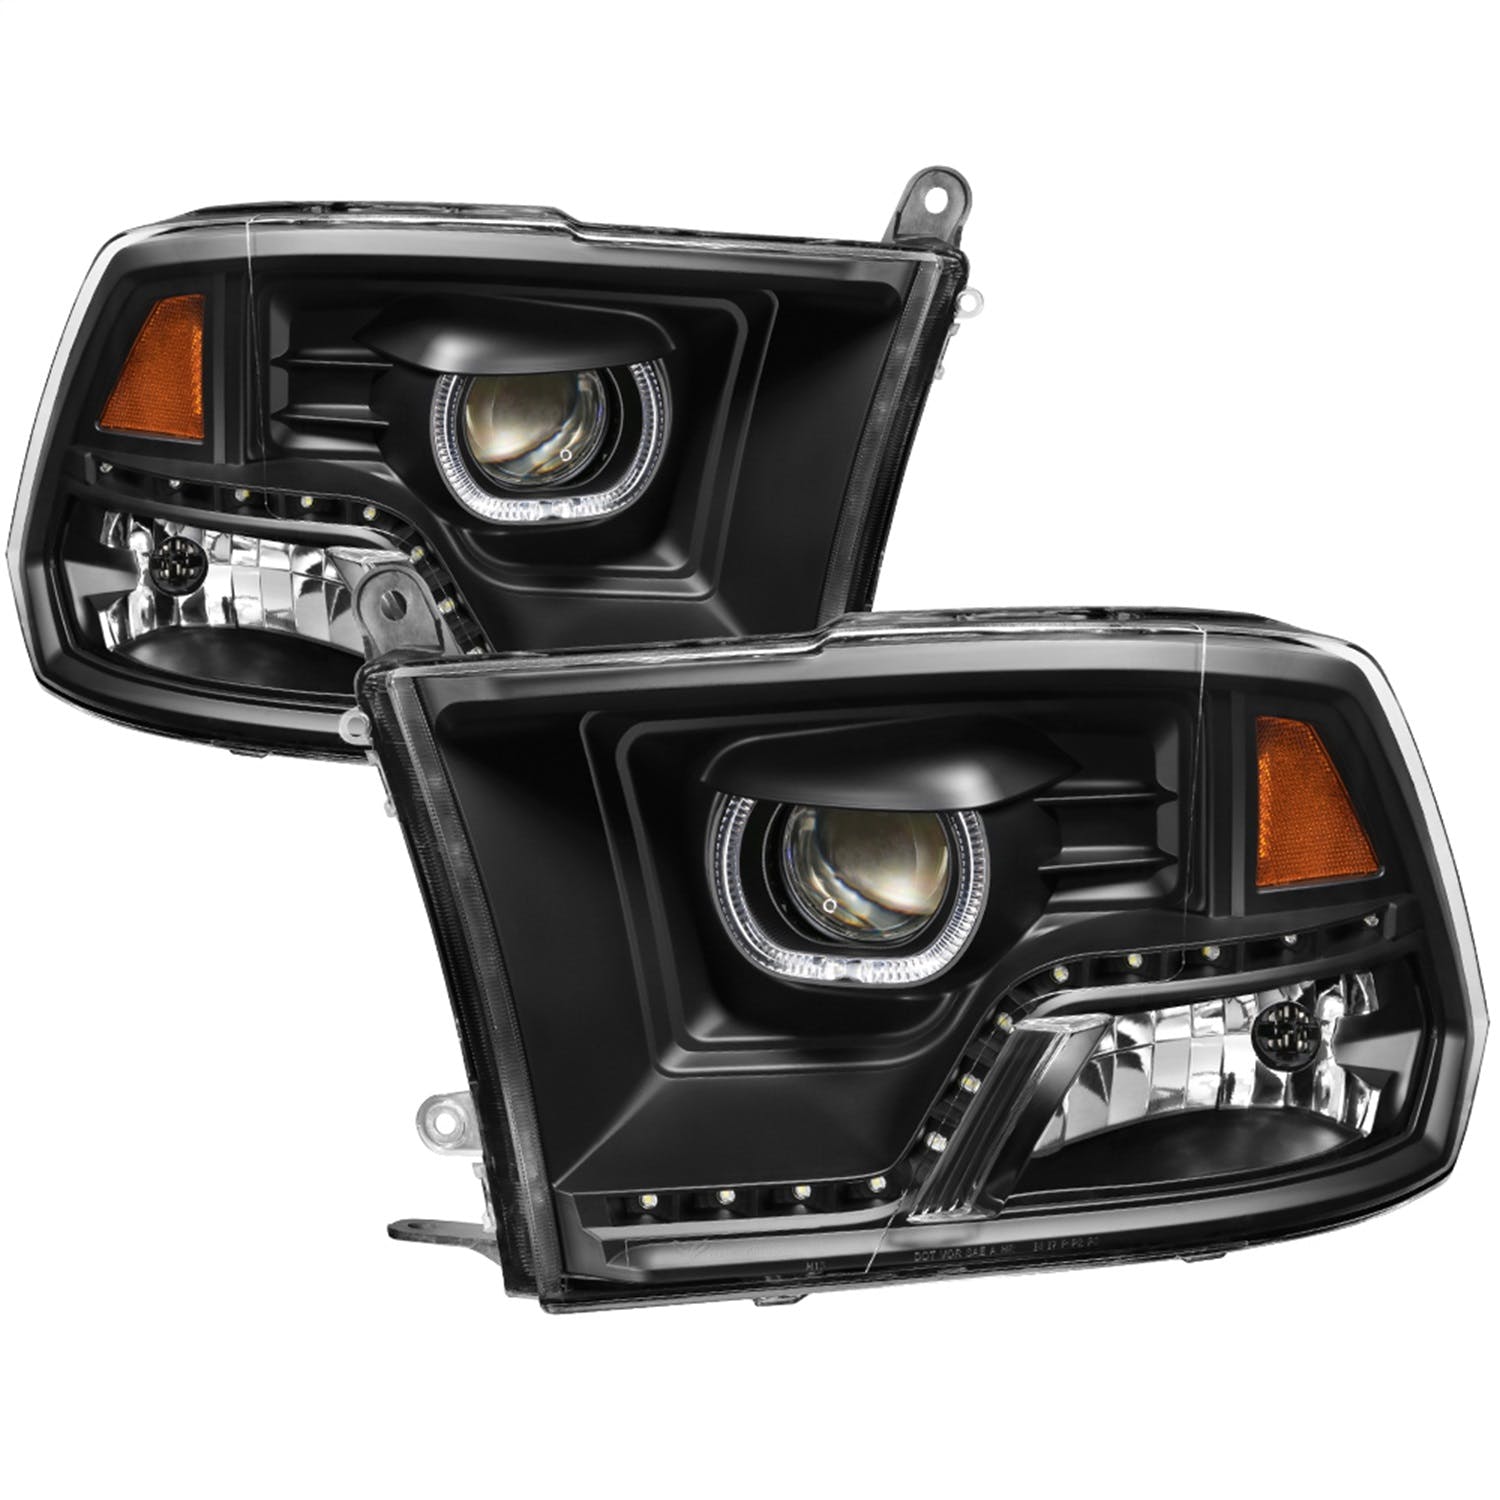 XTUNE POWER 9036729 Dodge Ram 1500 09 18 Ram 2500 3500 10 19 Projector Headlights Halogen Model Only ( Not Compatible With Factory Projector And LED DRL ) LED Halo Low Beam H9(Included) ; High Beam H9 ; Signal 3157(Not Included) Black